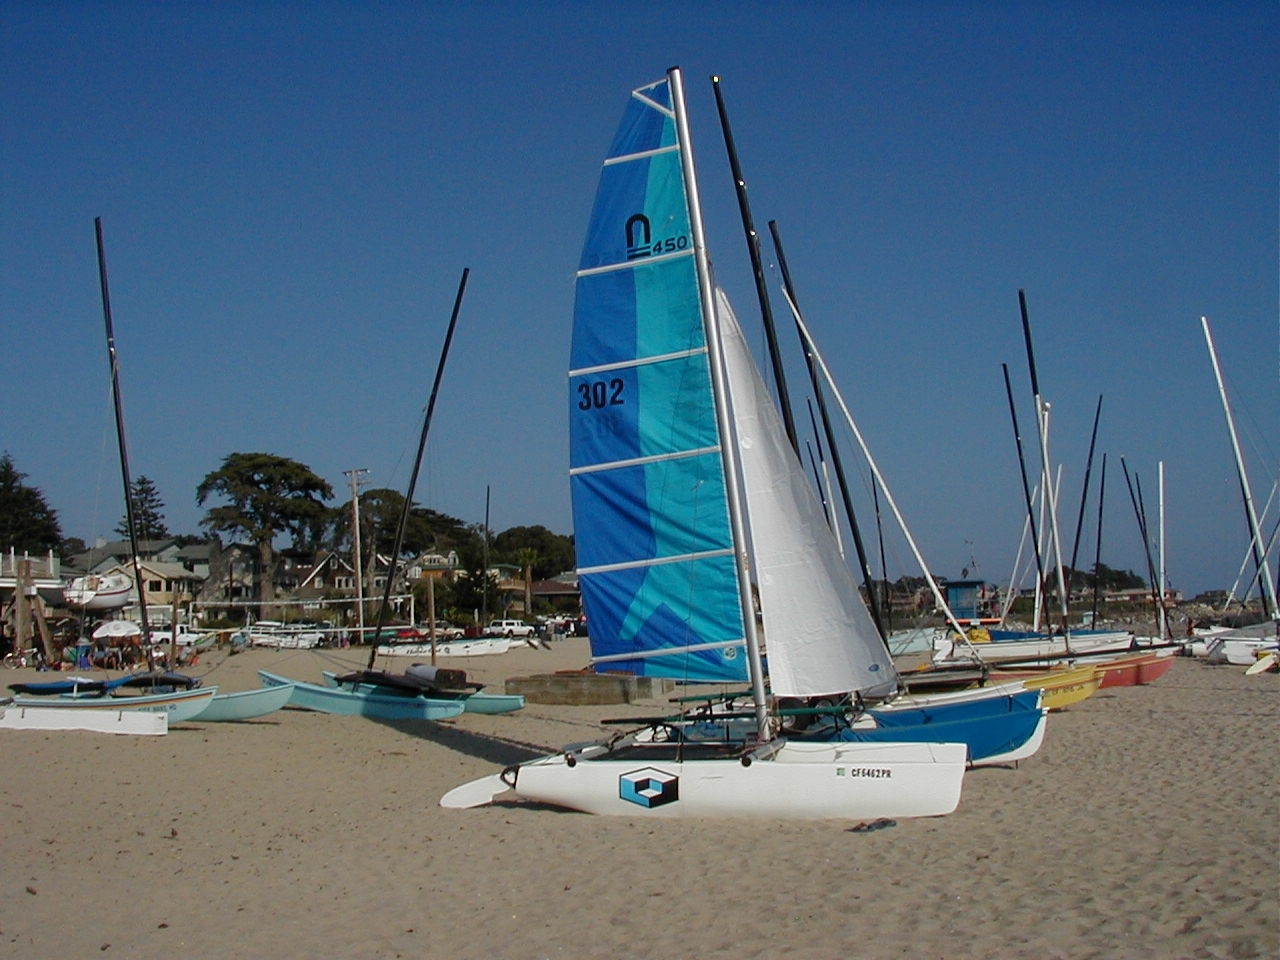 Attached picture 36260-nacra 450 on beach.JPG